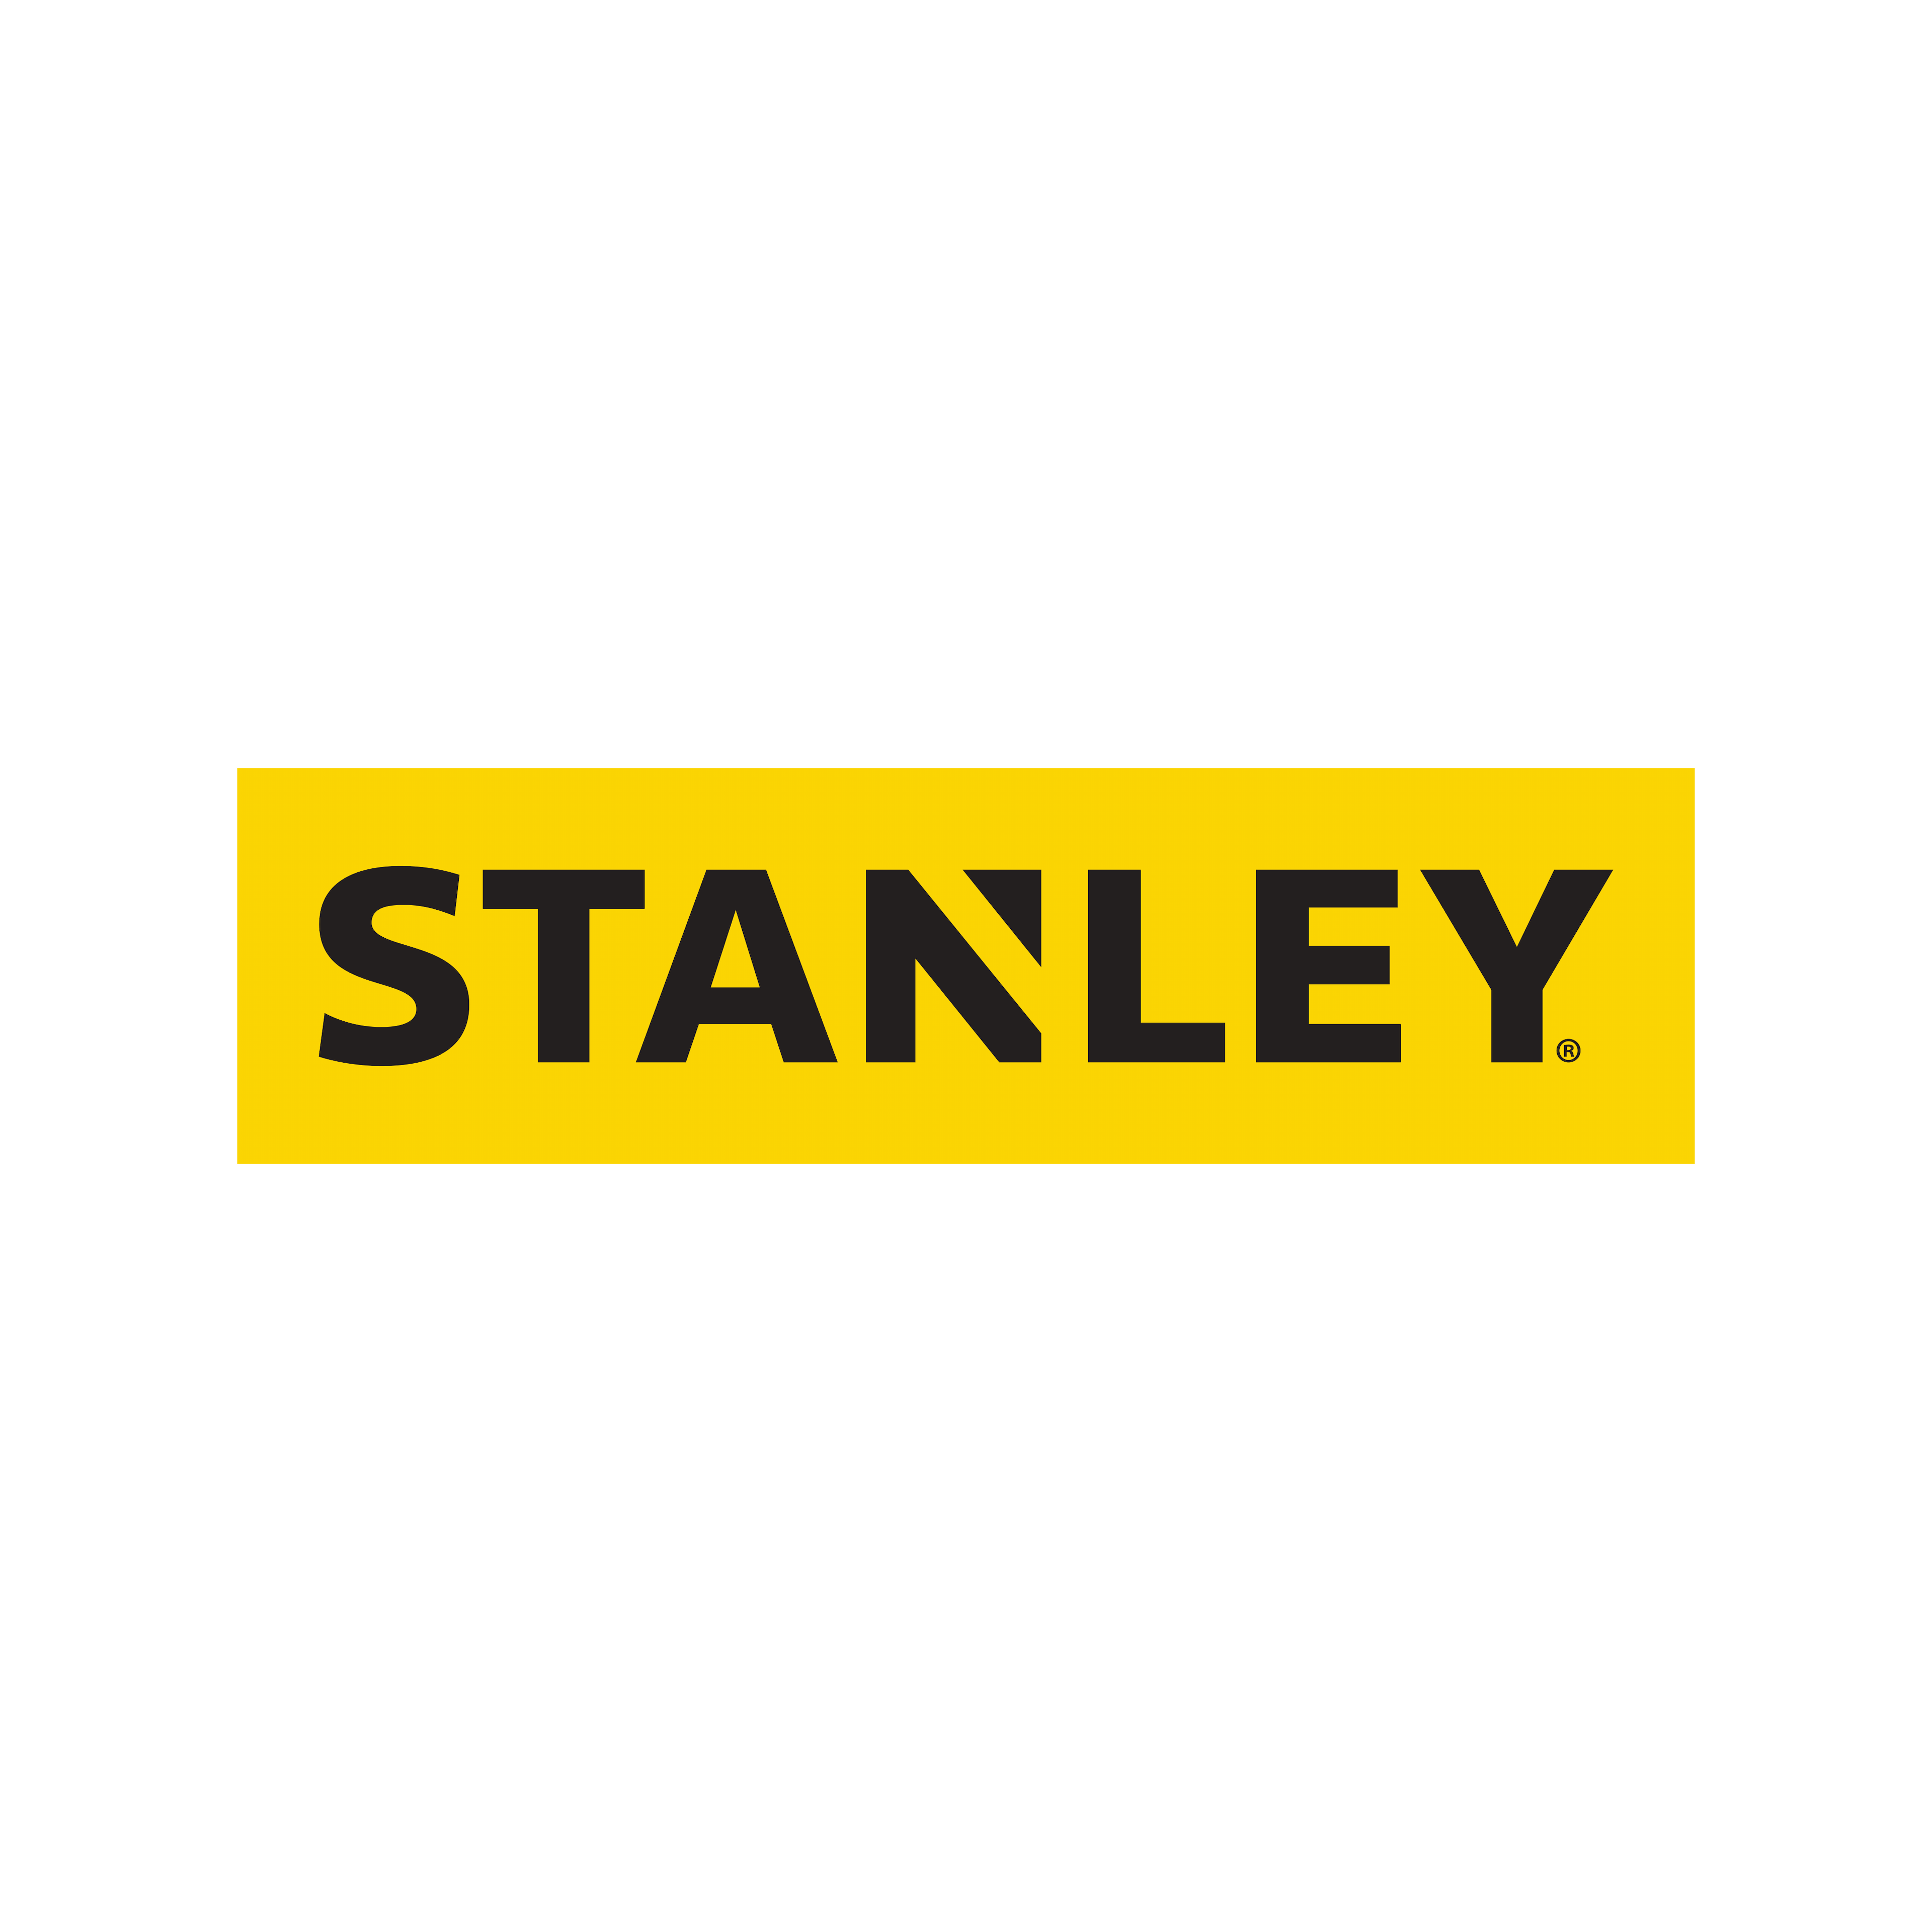 /_next/static/media/stanley.5e4815df.png